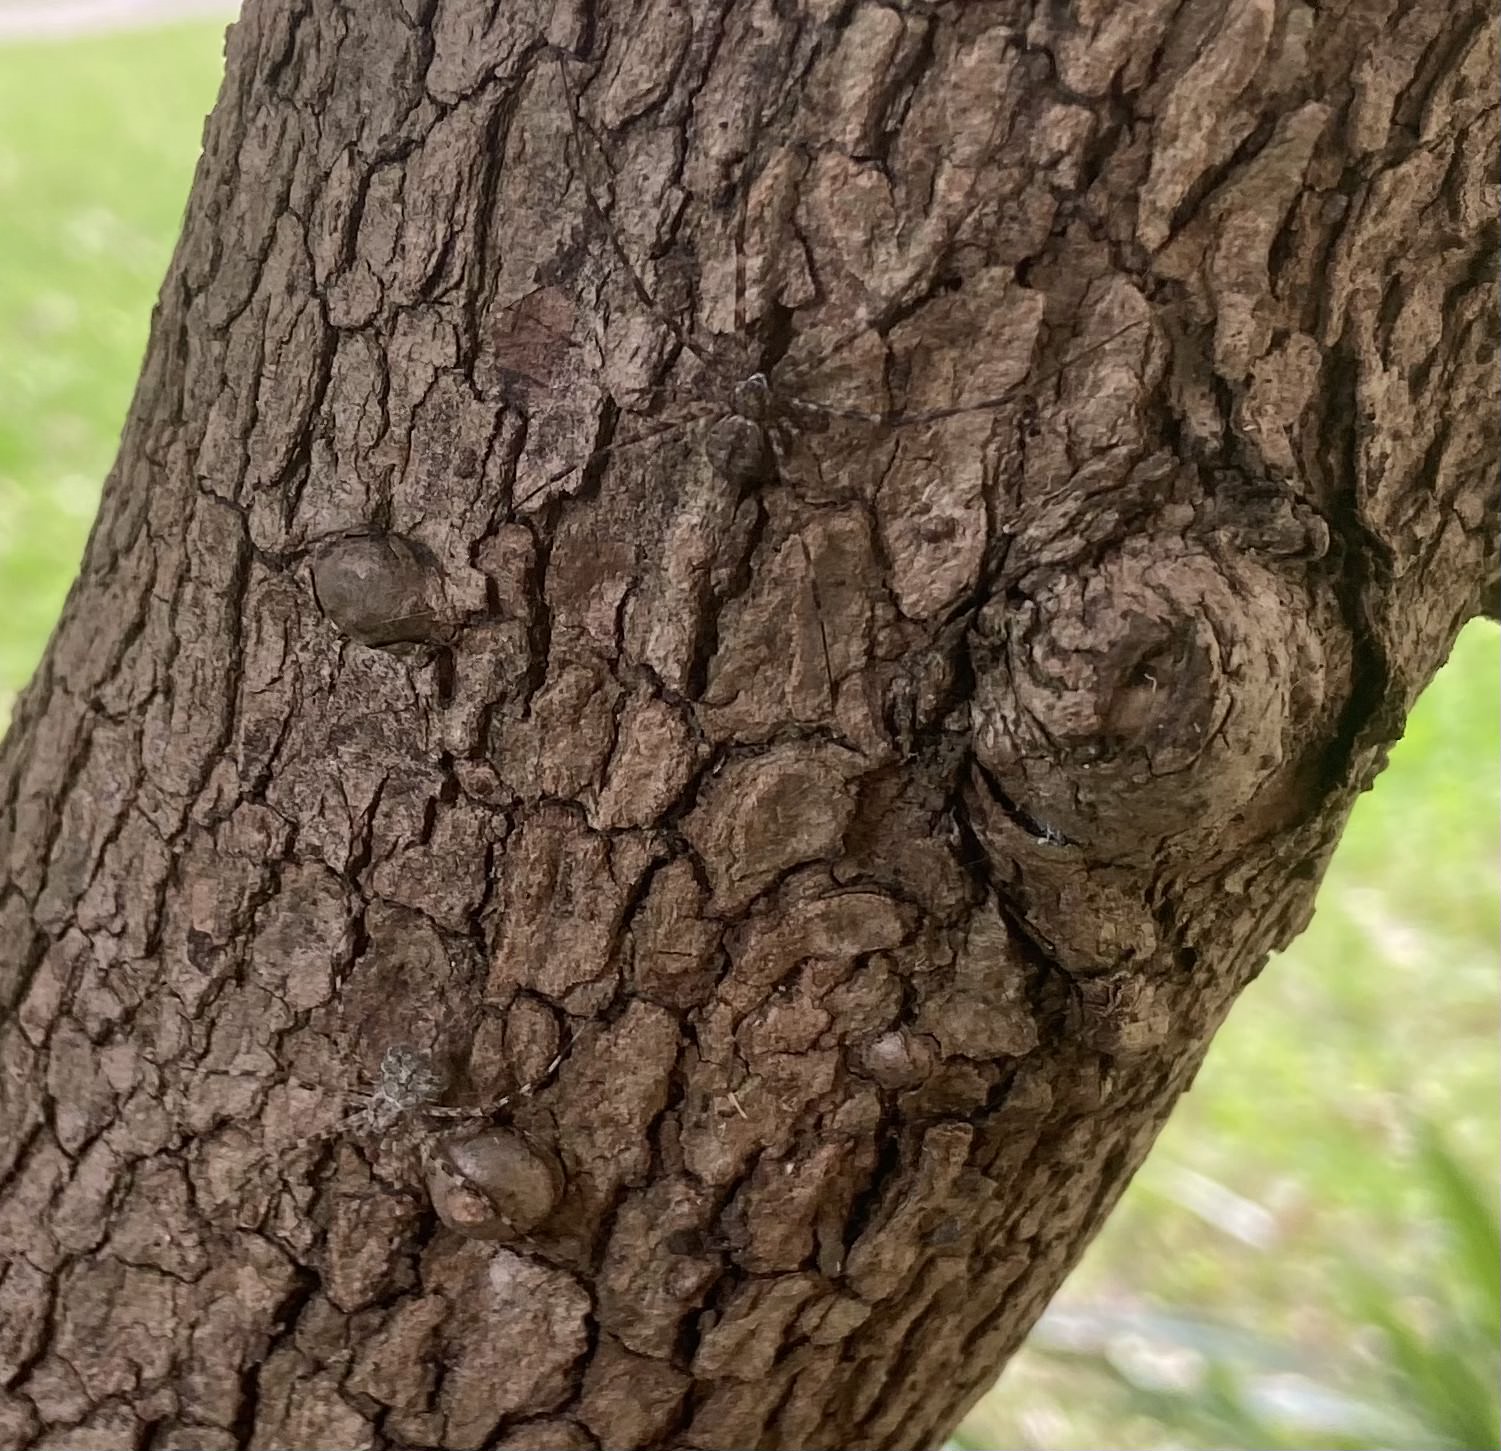 Two spiders camouflaged against a tree trunk